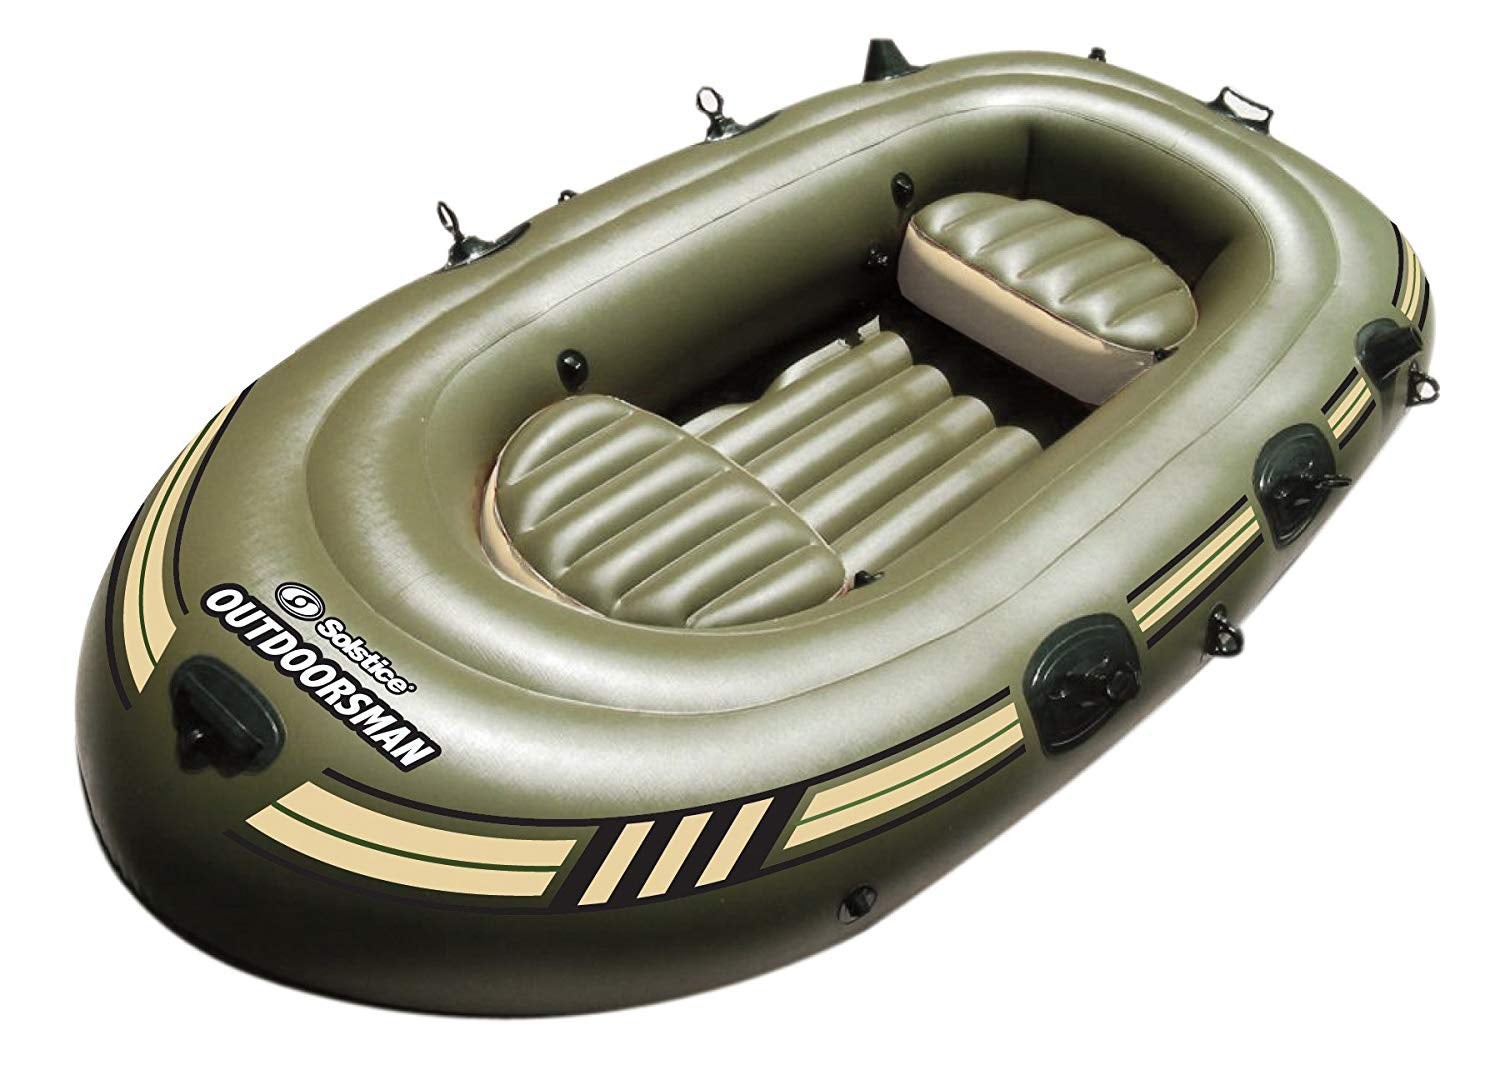 Solstice Outdoorsman 9000 4 person Fishing Boat